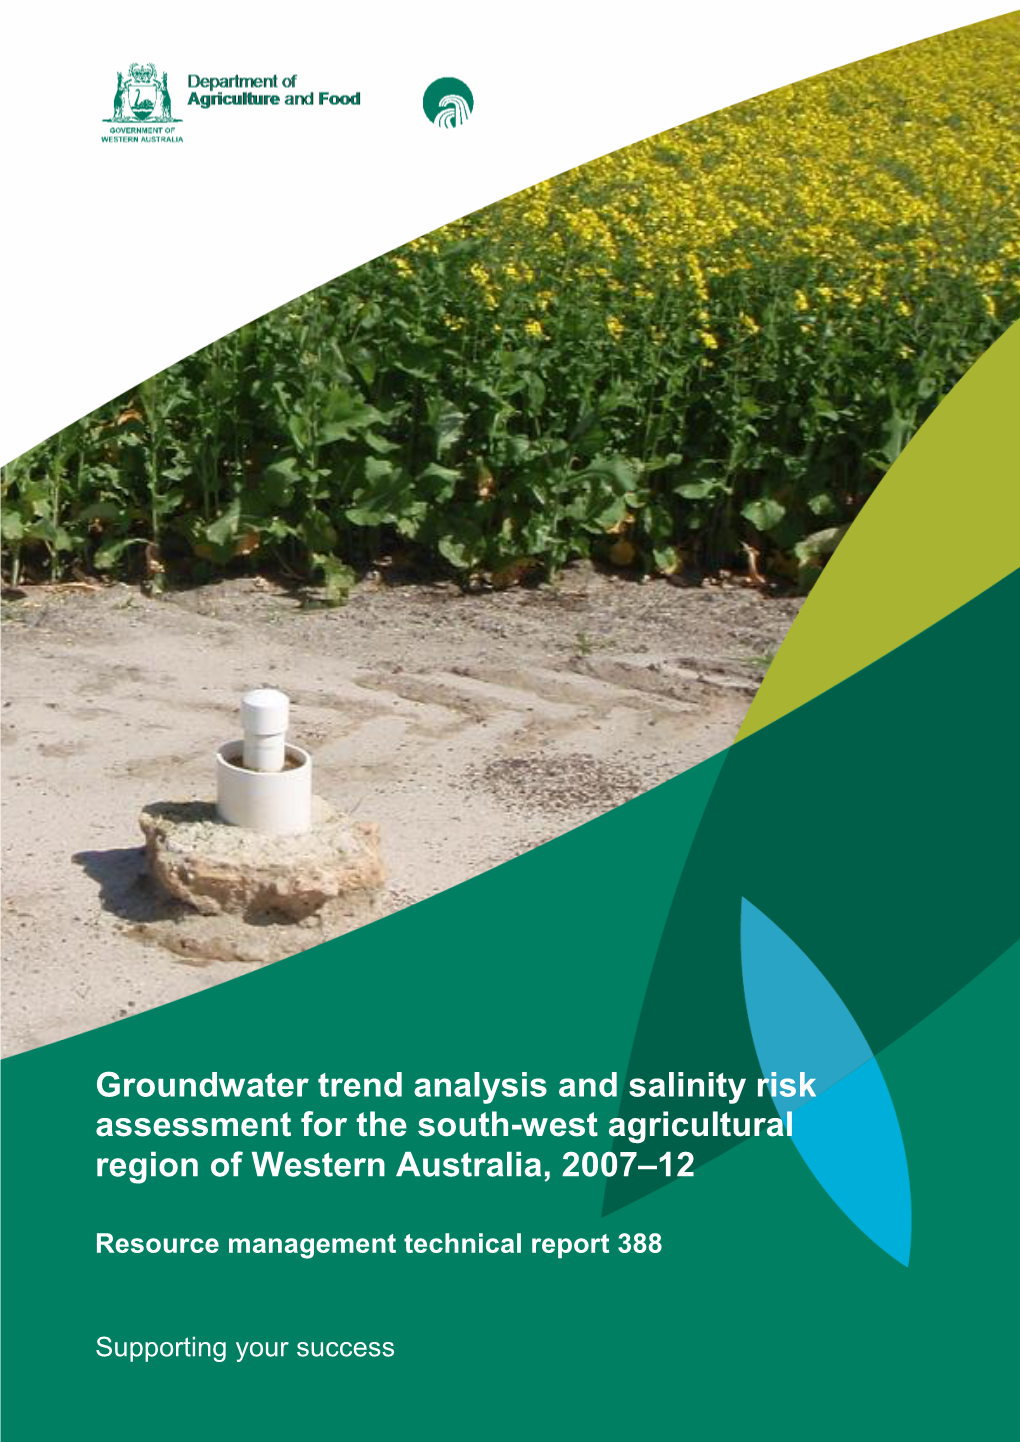 Groundwater Trend Analysis and Salinity Risk Assessment for the South-West Agricultural Region of Western Australia, 2007–12